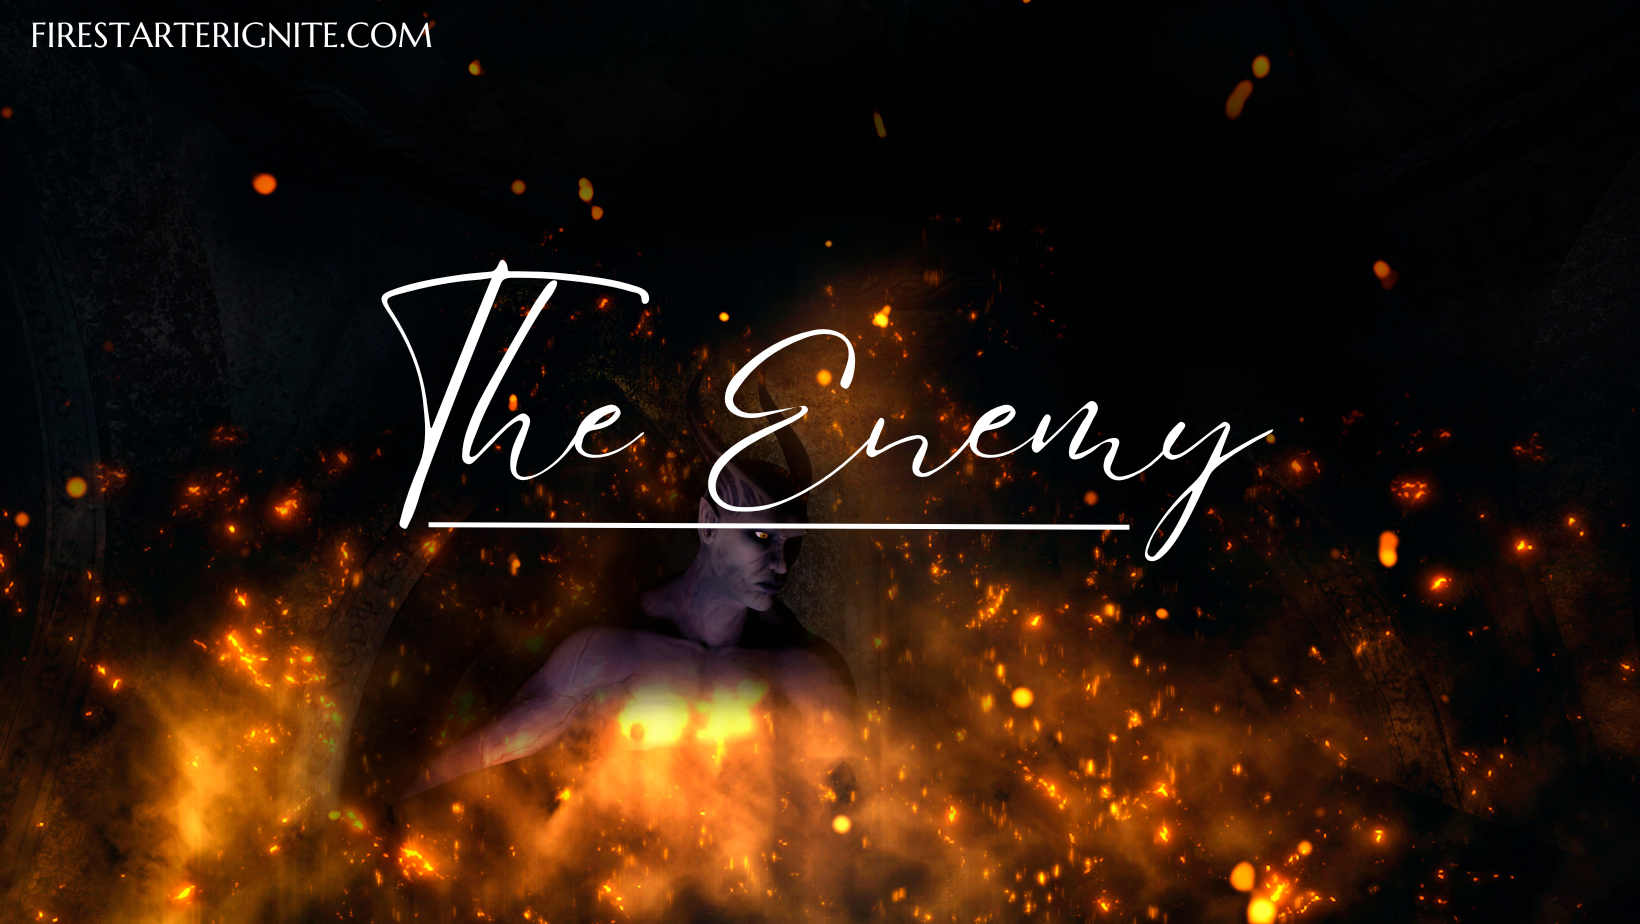 The Enemy